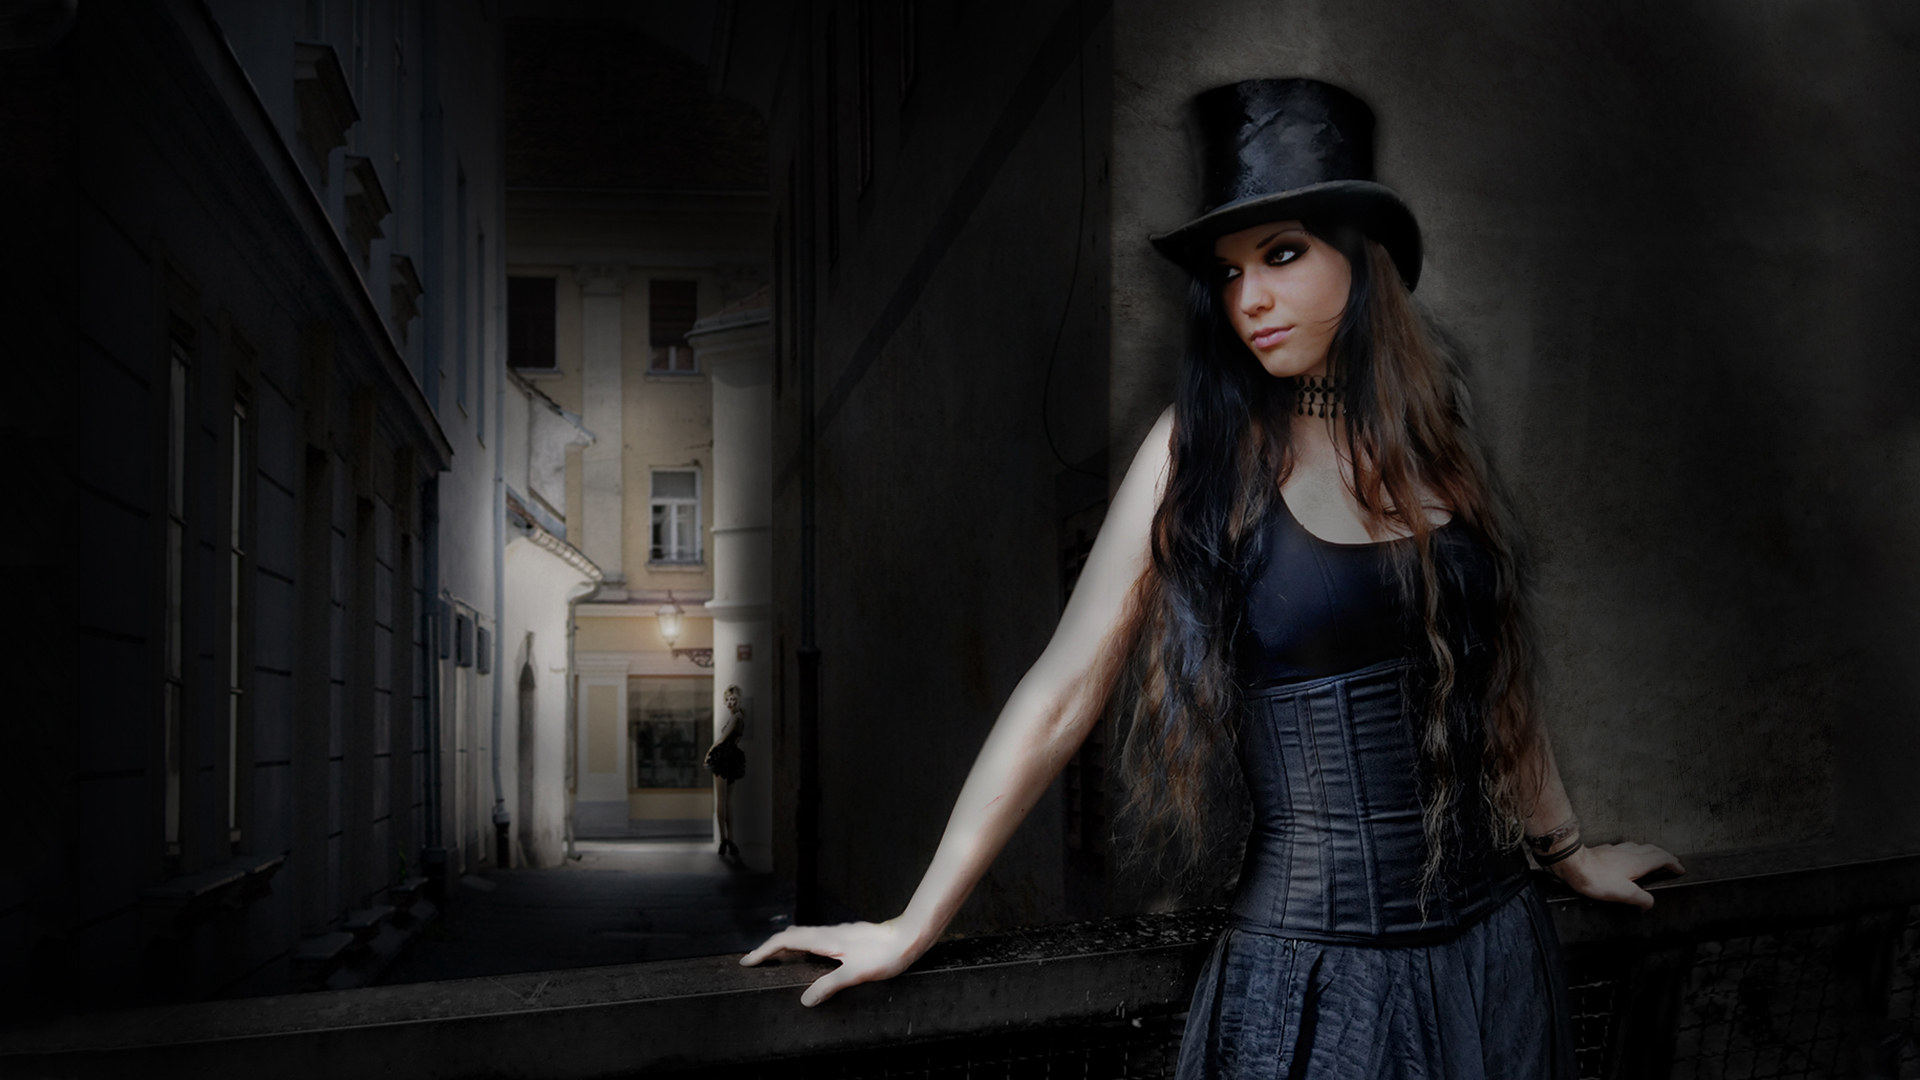 women, artistic, alley, gothic, street, top hat mobile wallpaper